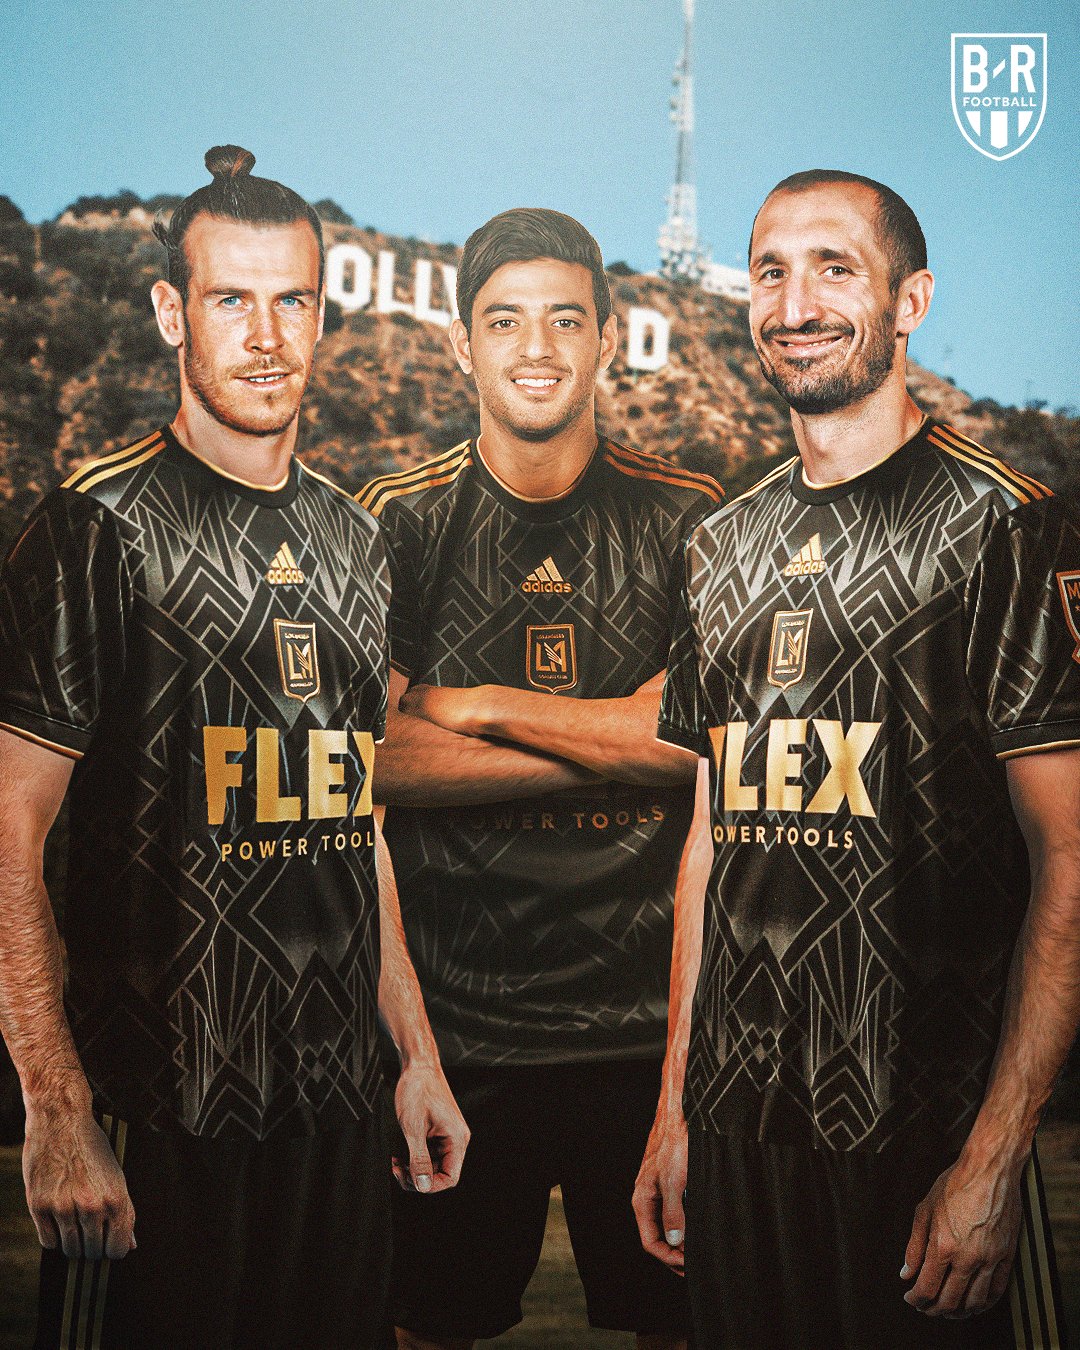 B/R Football on X: ▪️ Top of Supporters' Shield standings ▪️ Sign Giorgio  Chiellini ▪️ Sign Gareth Bale ▪️ Re-sign Carlos Vela Life is good for LAFC  😎  / X